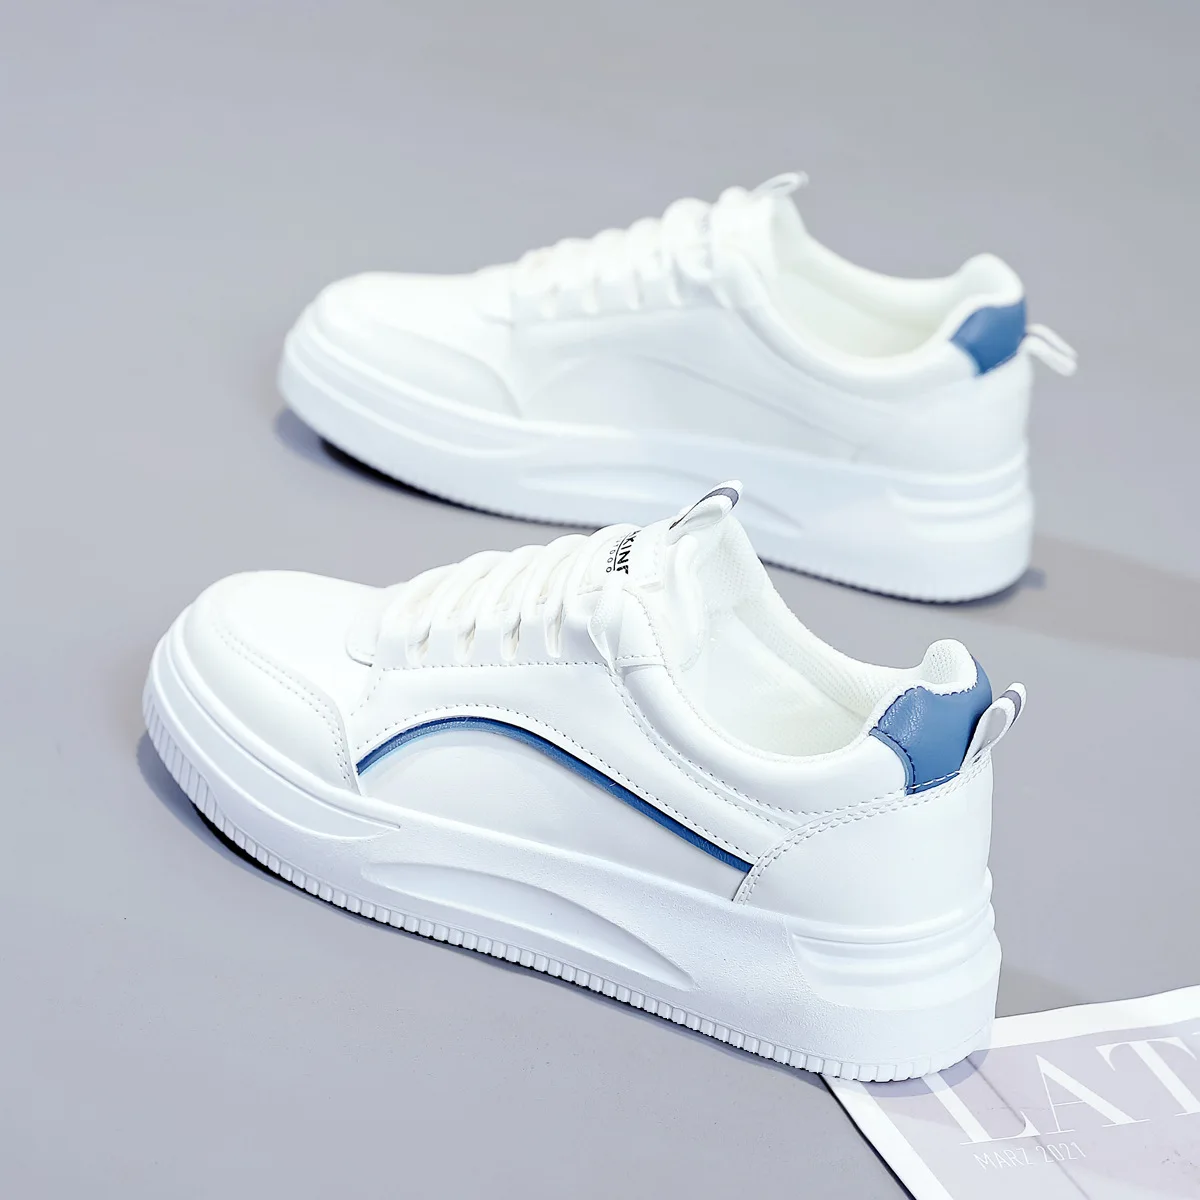 Spring/Summer 2023 Collection Sneakers White - Leather (70192SAD007390)